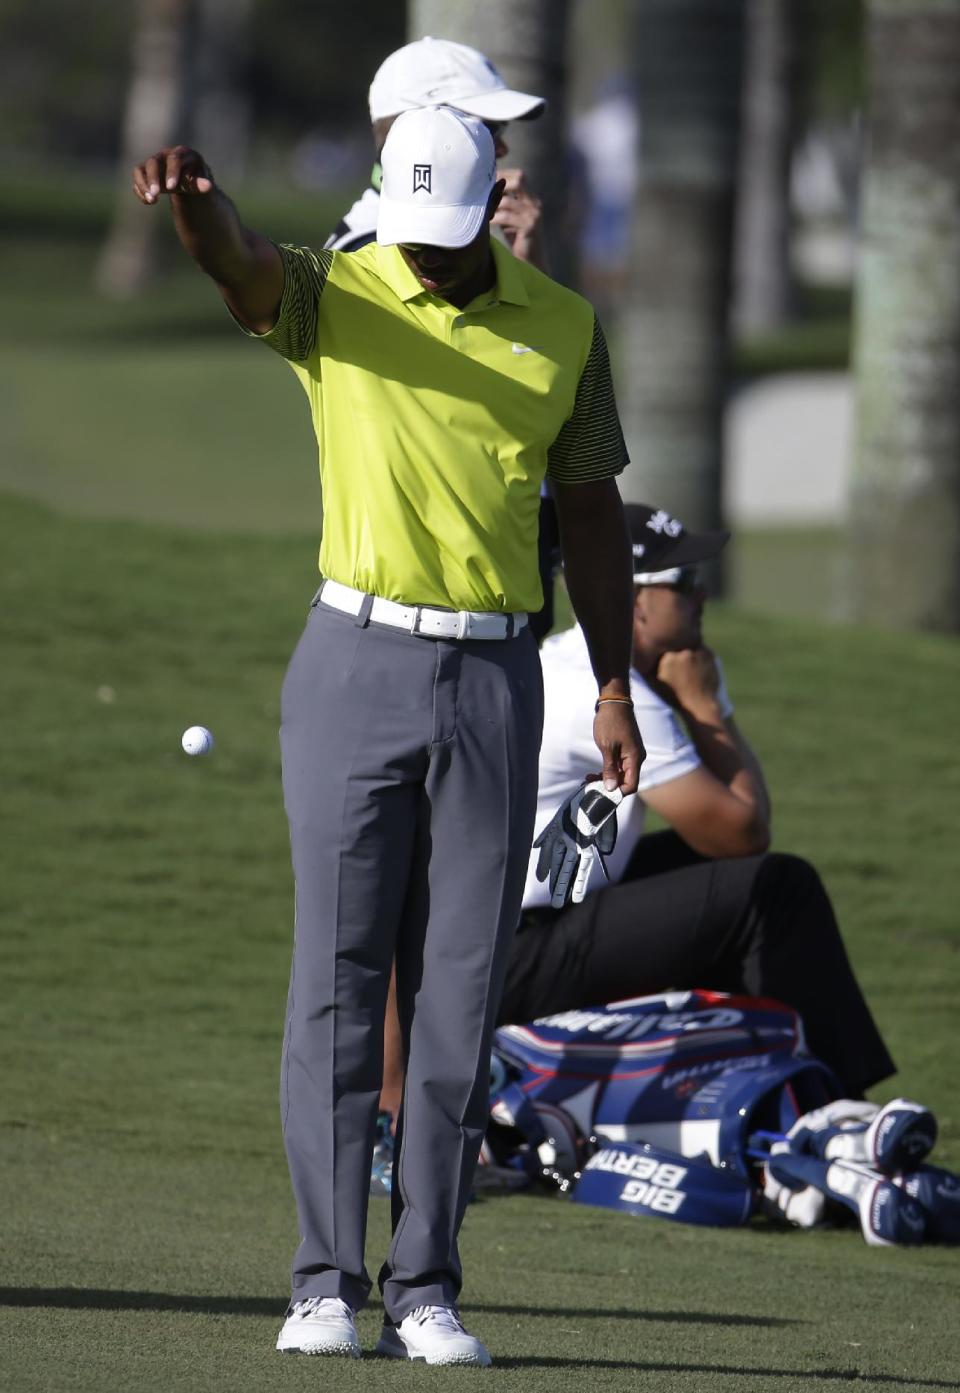 Tiger Woods takes a drop on the eighth hole during the second round of the Cadillac Championship golf tournament Friday, March 7, 2014, in Doral, Fla. More than 100 balls went into the water in the newly designed course. (AP Photo/Lynne Sladky)